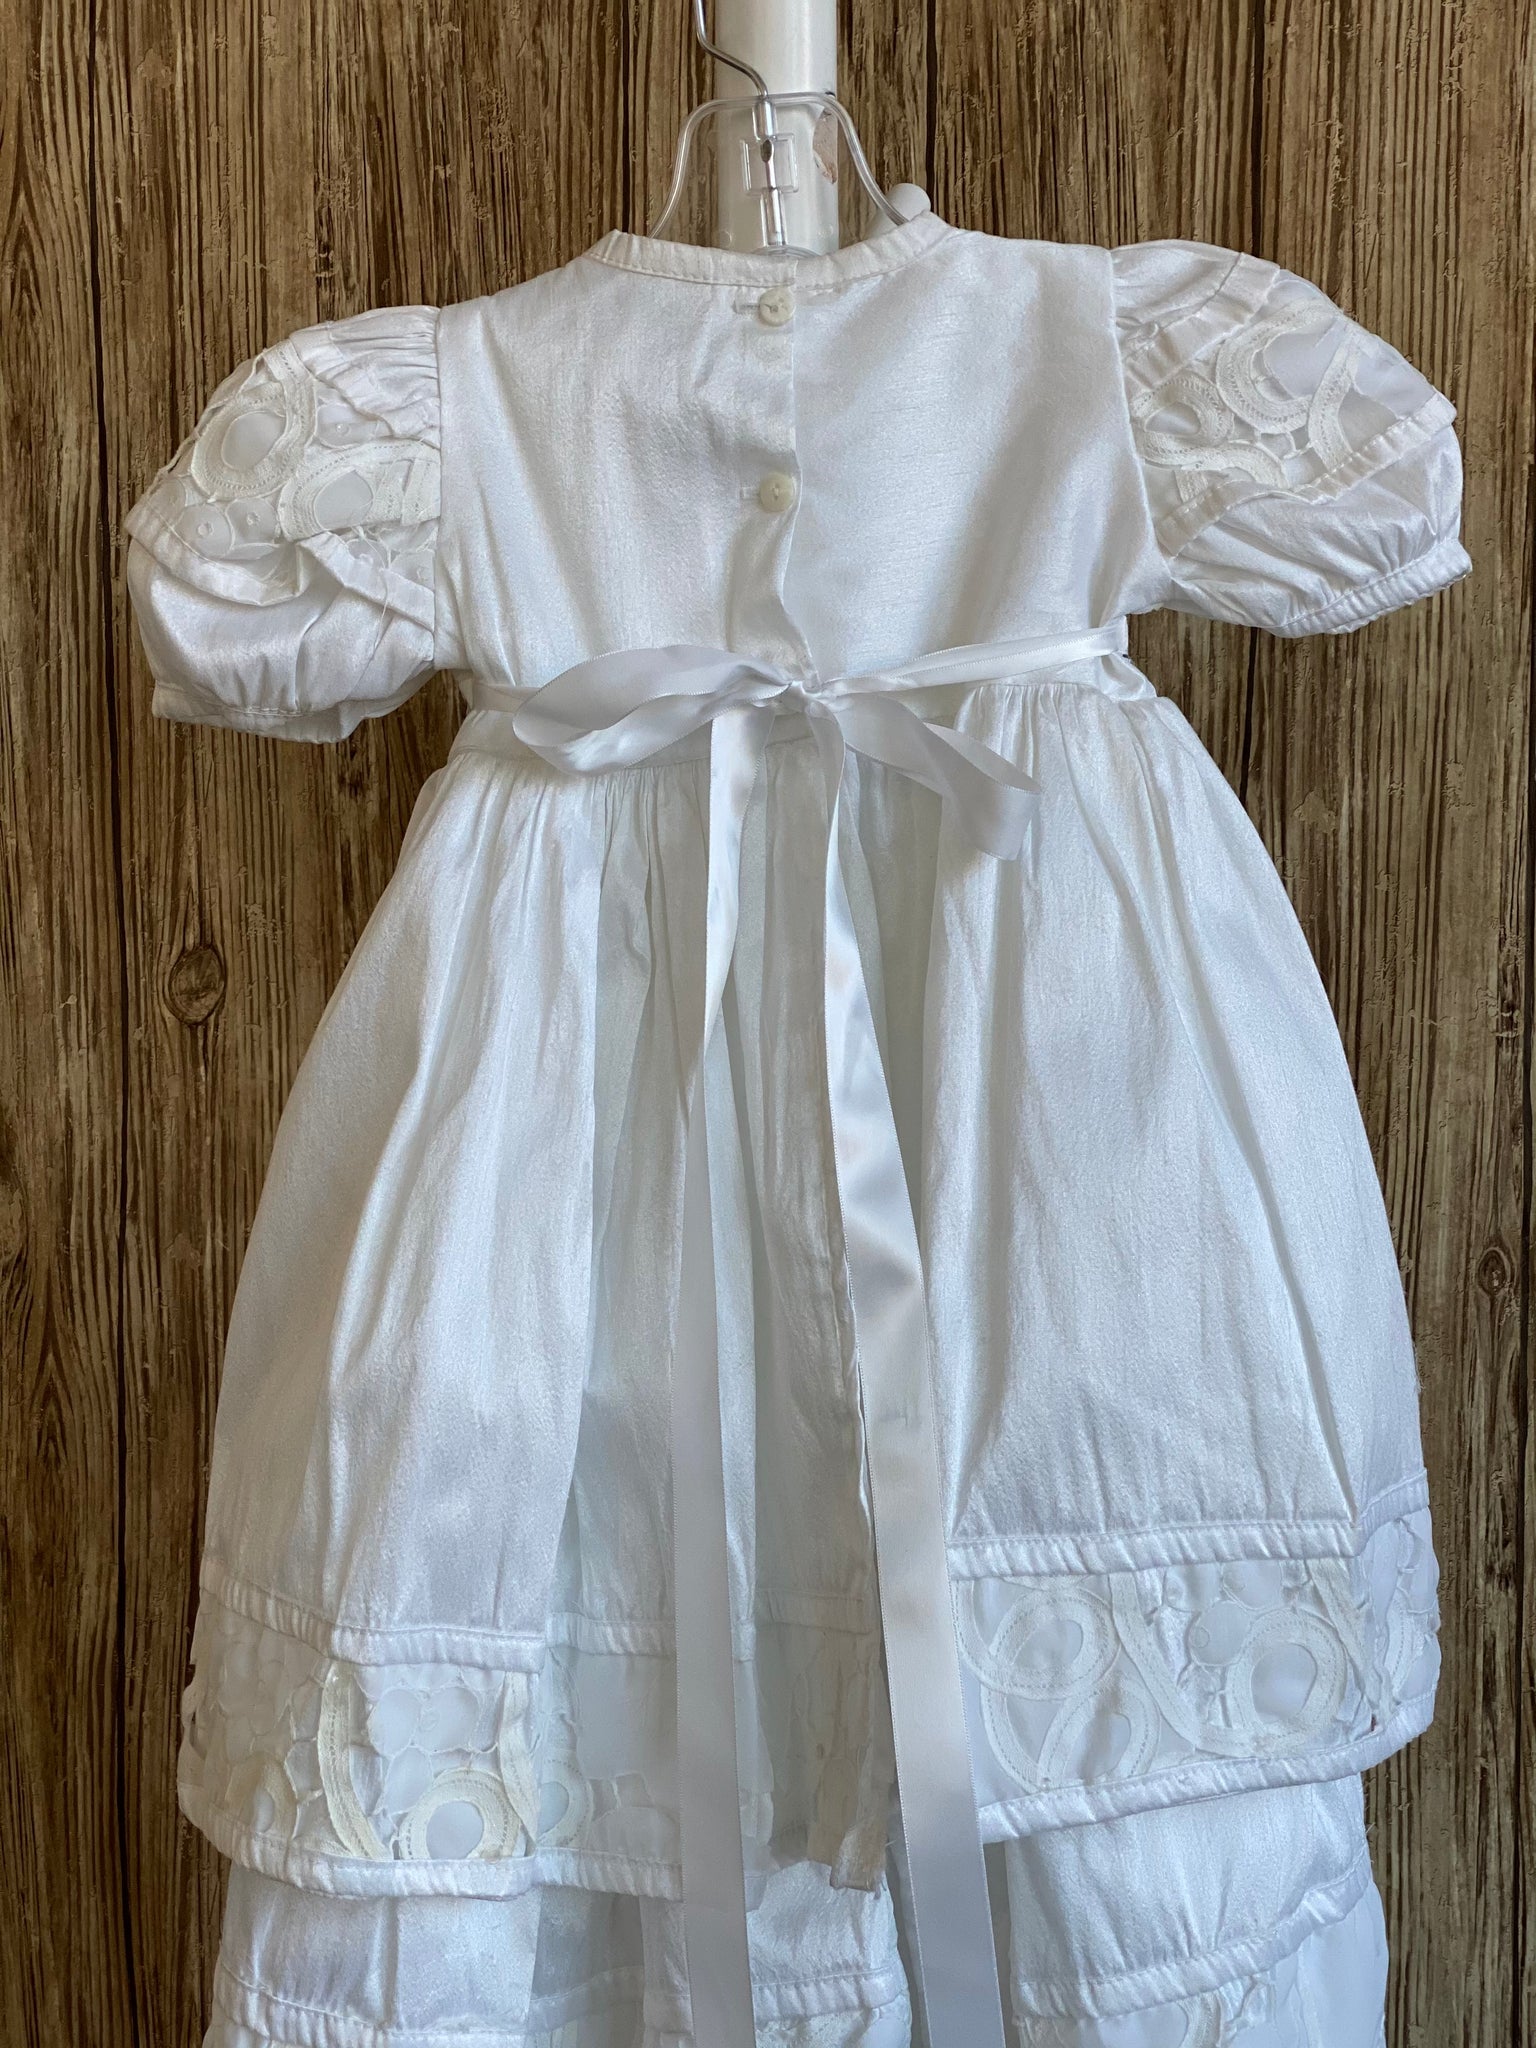 This a beautiful, one-of-a-kind baptism gown.  A lovely gown for a precious child.  White, size 12M Satin bodice Lace detailing along bodice and sleeves Rhinestones along bodice  Puffed sleeves Large flower  Satin skirting with lace detailing on edges  Select a beautiful headband to complete the outfit.  We have many to choose from.